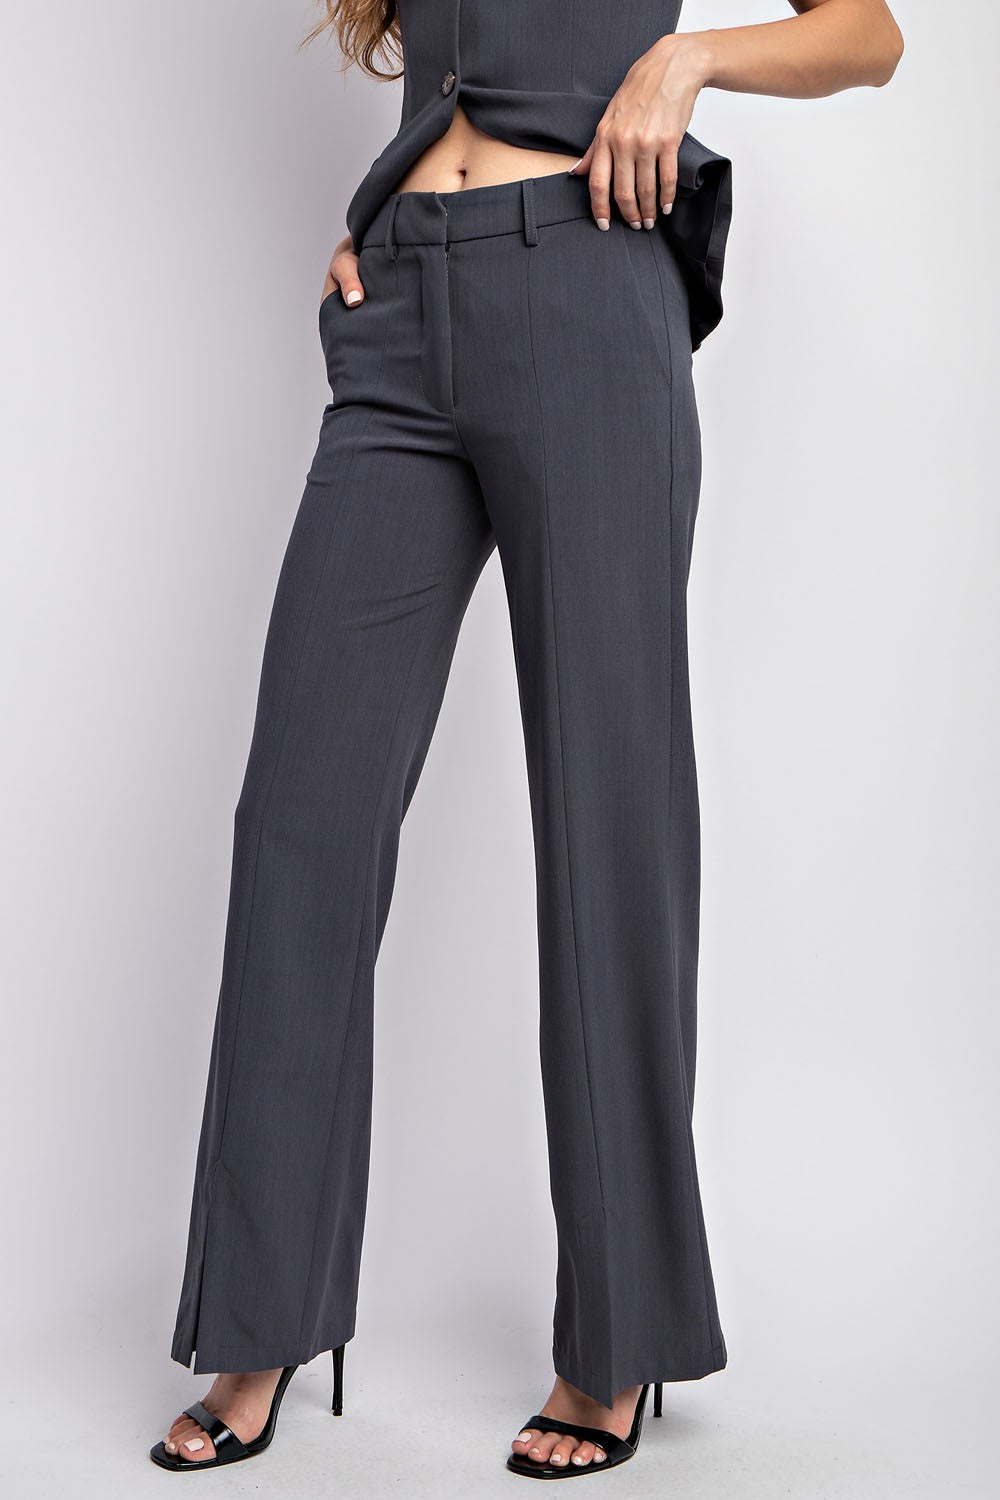 The Stasi Tailored Top + Flare Pants Set - Sold Separately